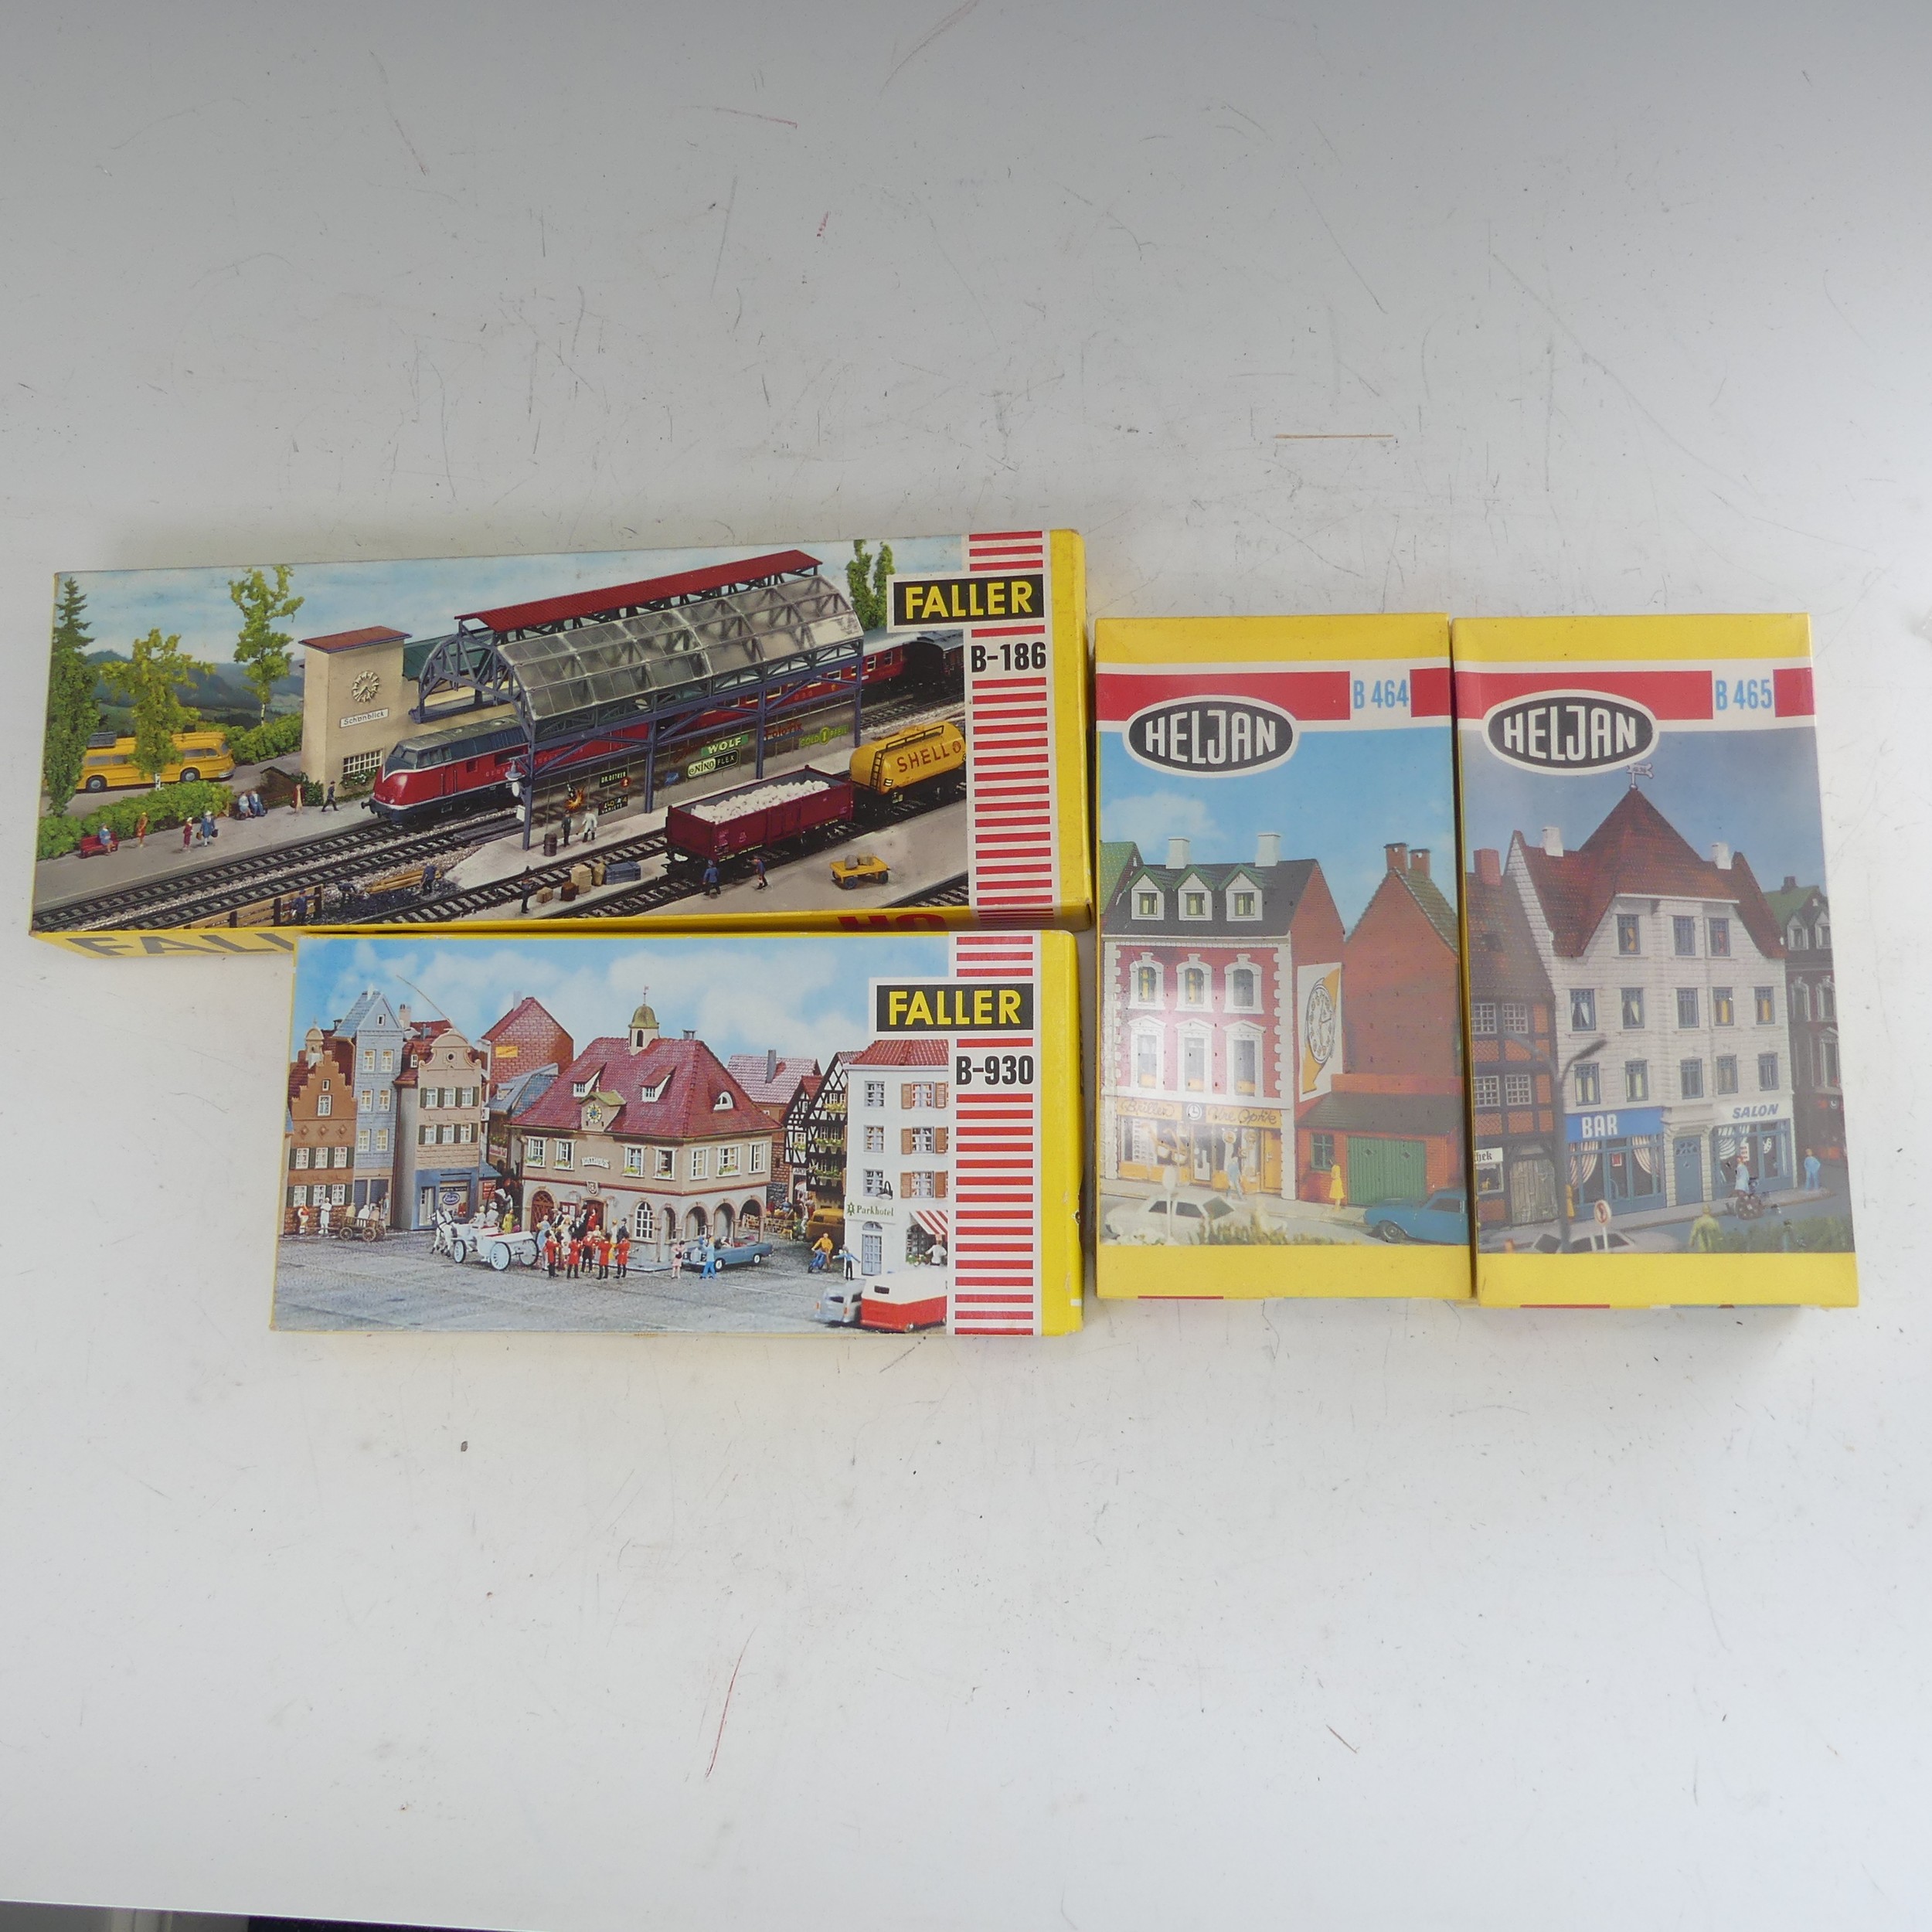 A quantity of '00' gauge plastic and card track and trackside accessories and buildings kits, - Image 6 of 18